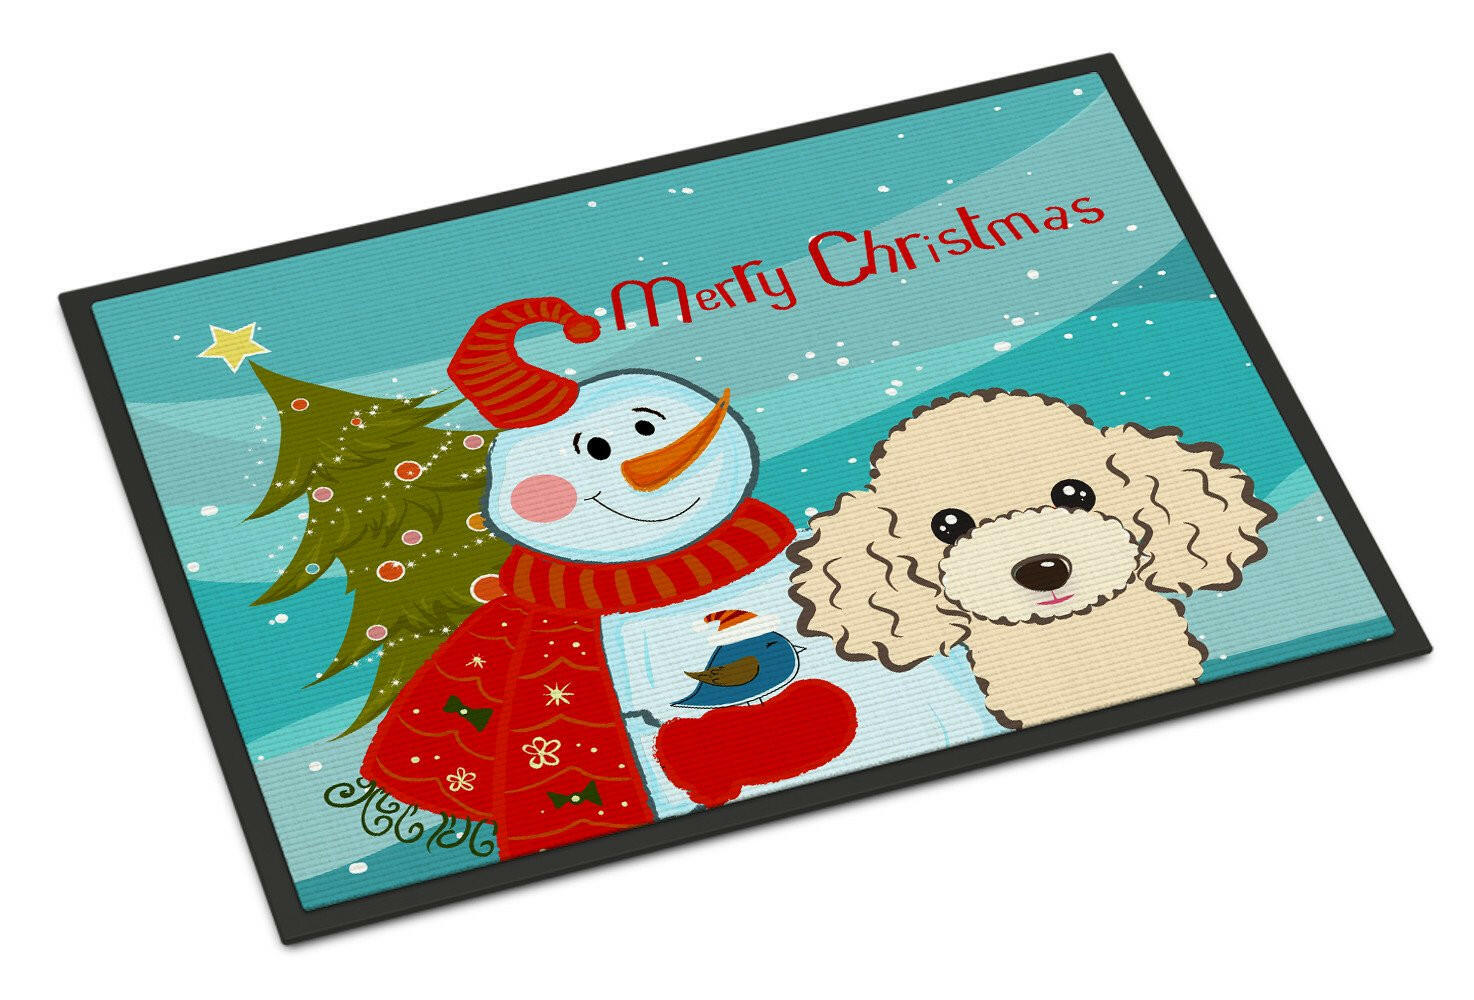 Snowman with Buff Poodle Indoor or Outdoor Mat 18x27 BB1878MAT - the-store.com